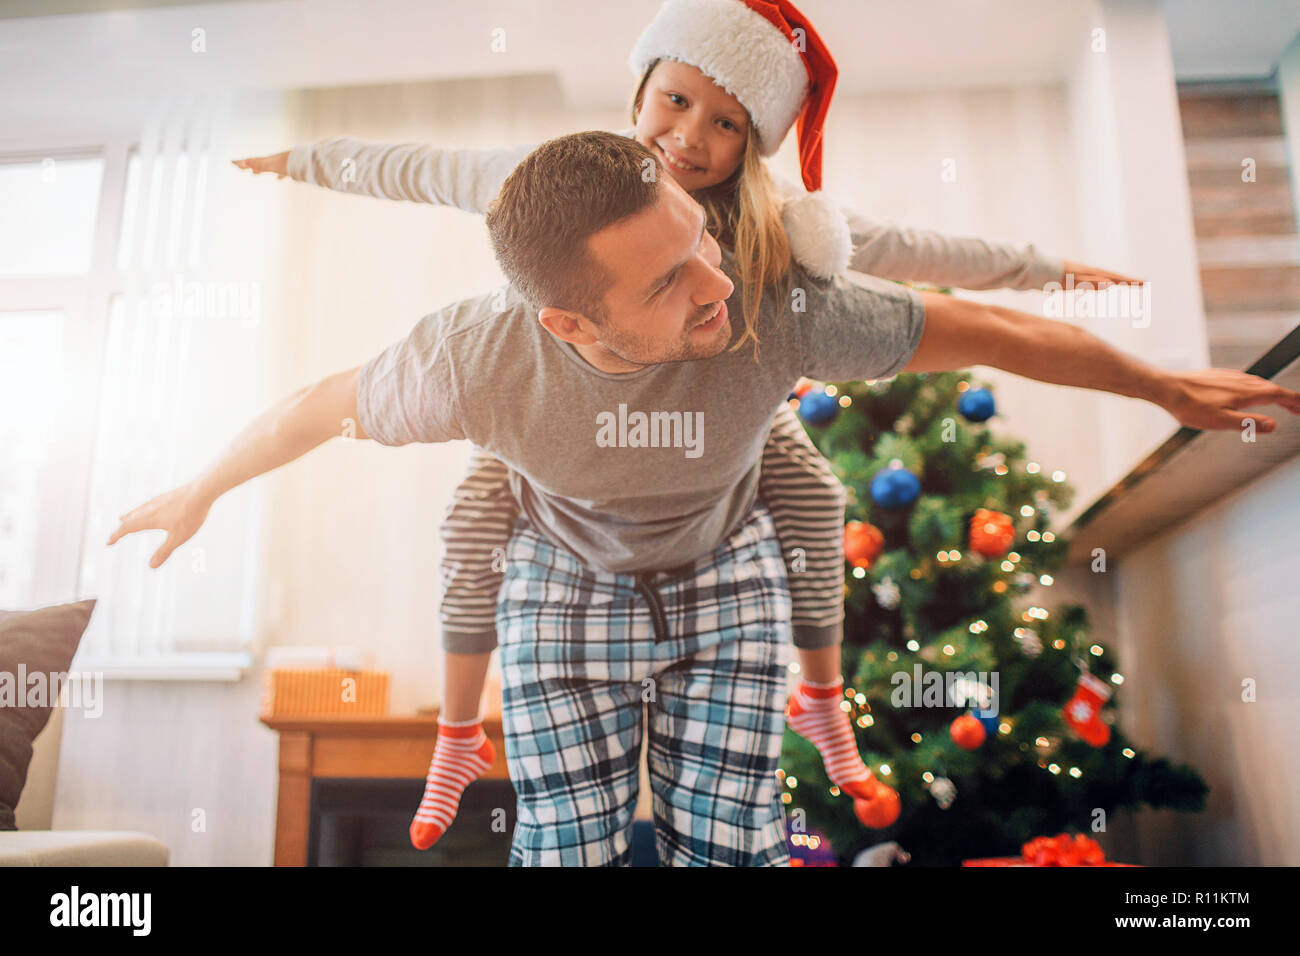 Father and daughter playing in room. He rides her on his back. They keeps hands aside of body. Young man looks at girl. They smile. People are positiv Stock Photo